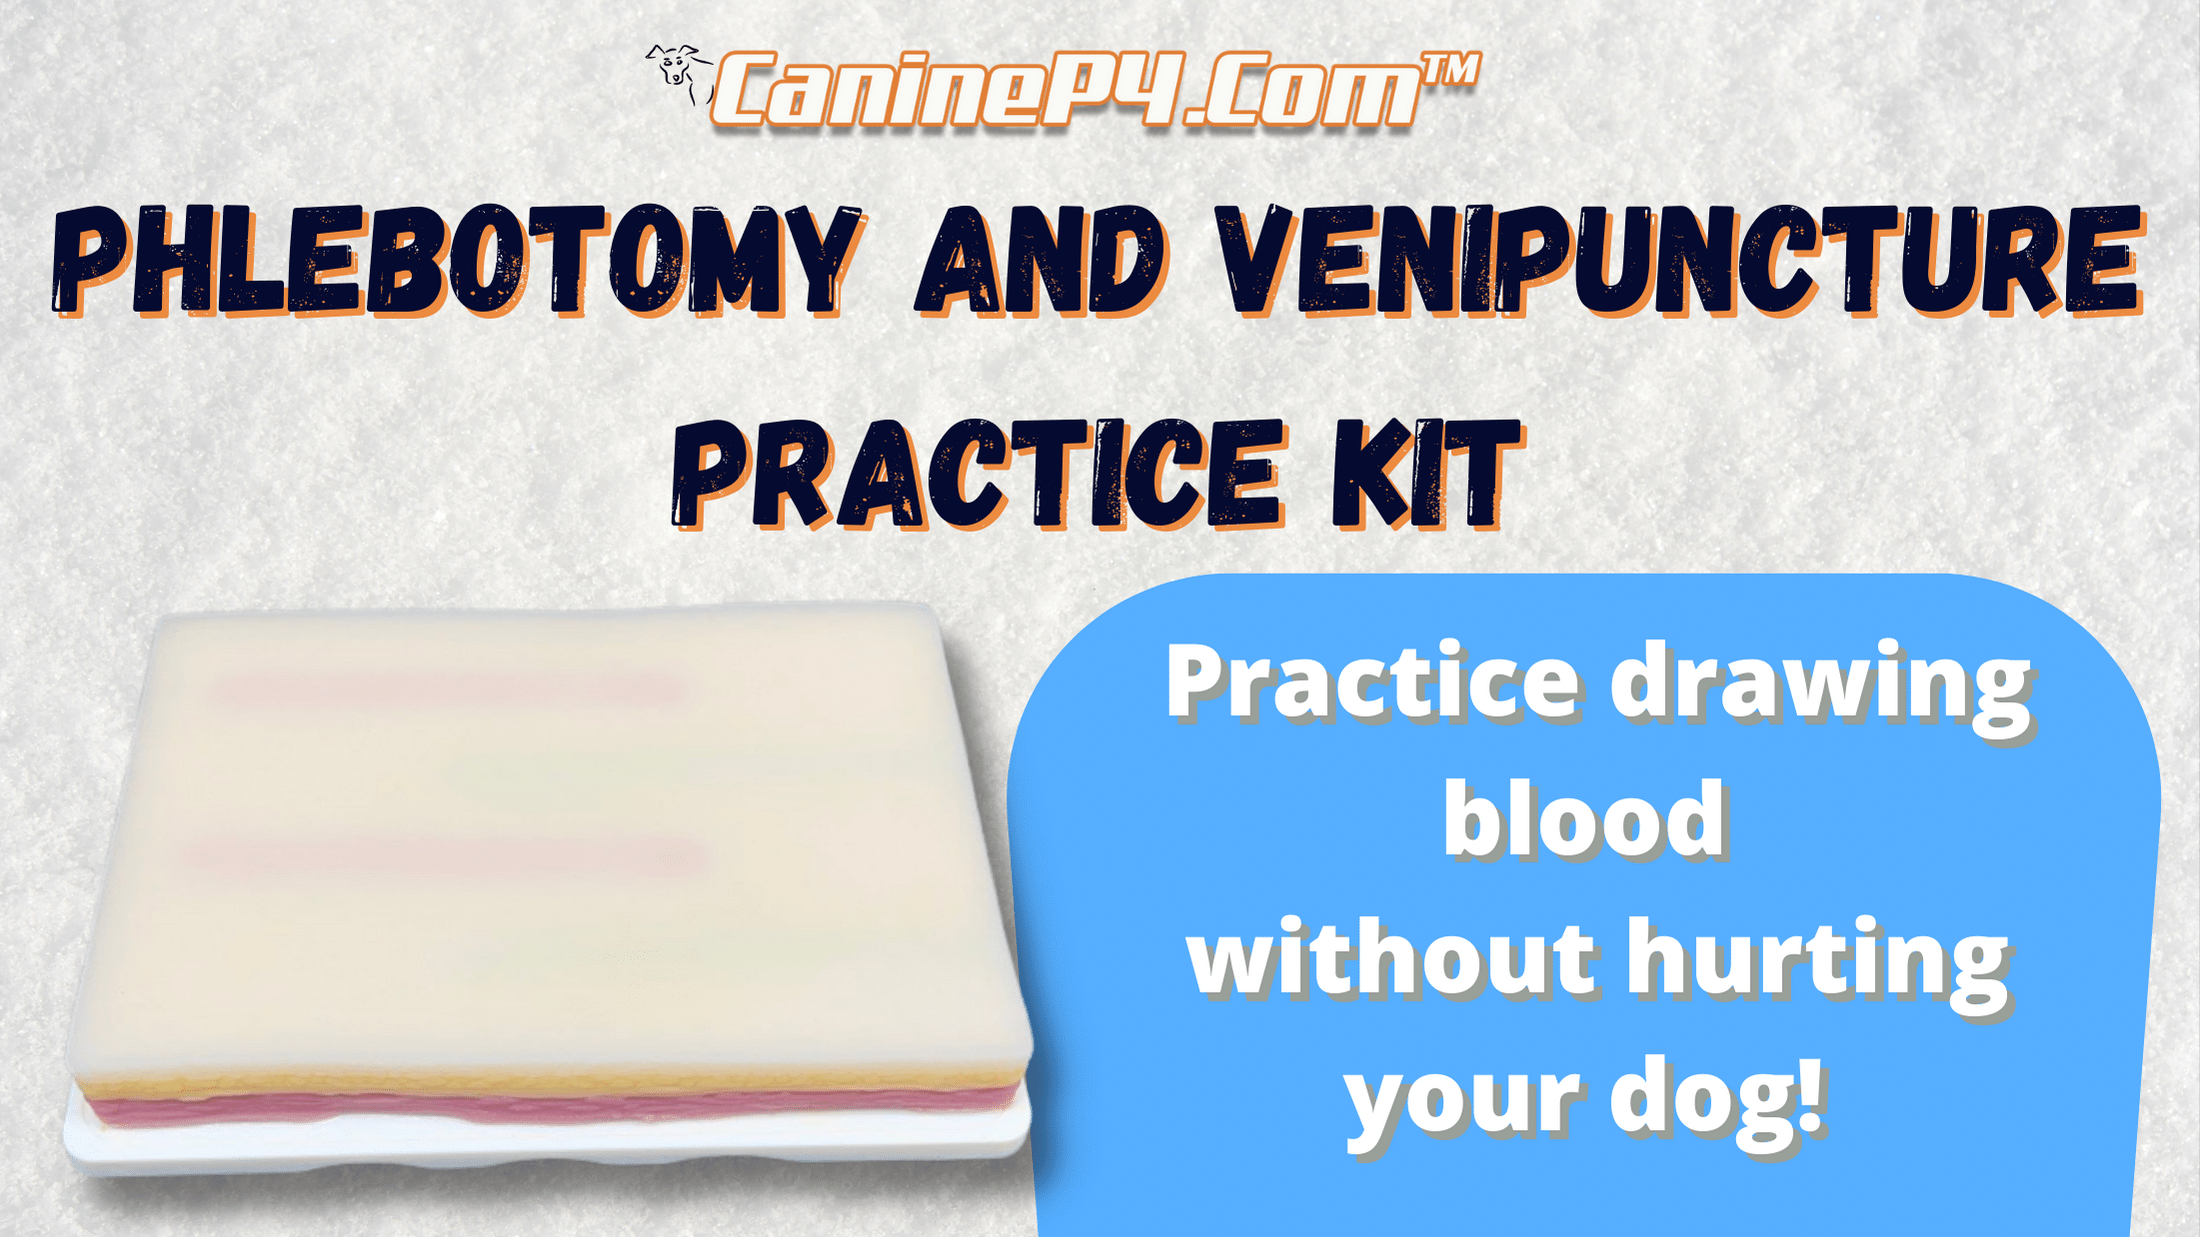 phlebotomy-and-venipuncture-practice-kit